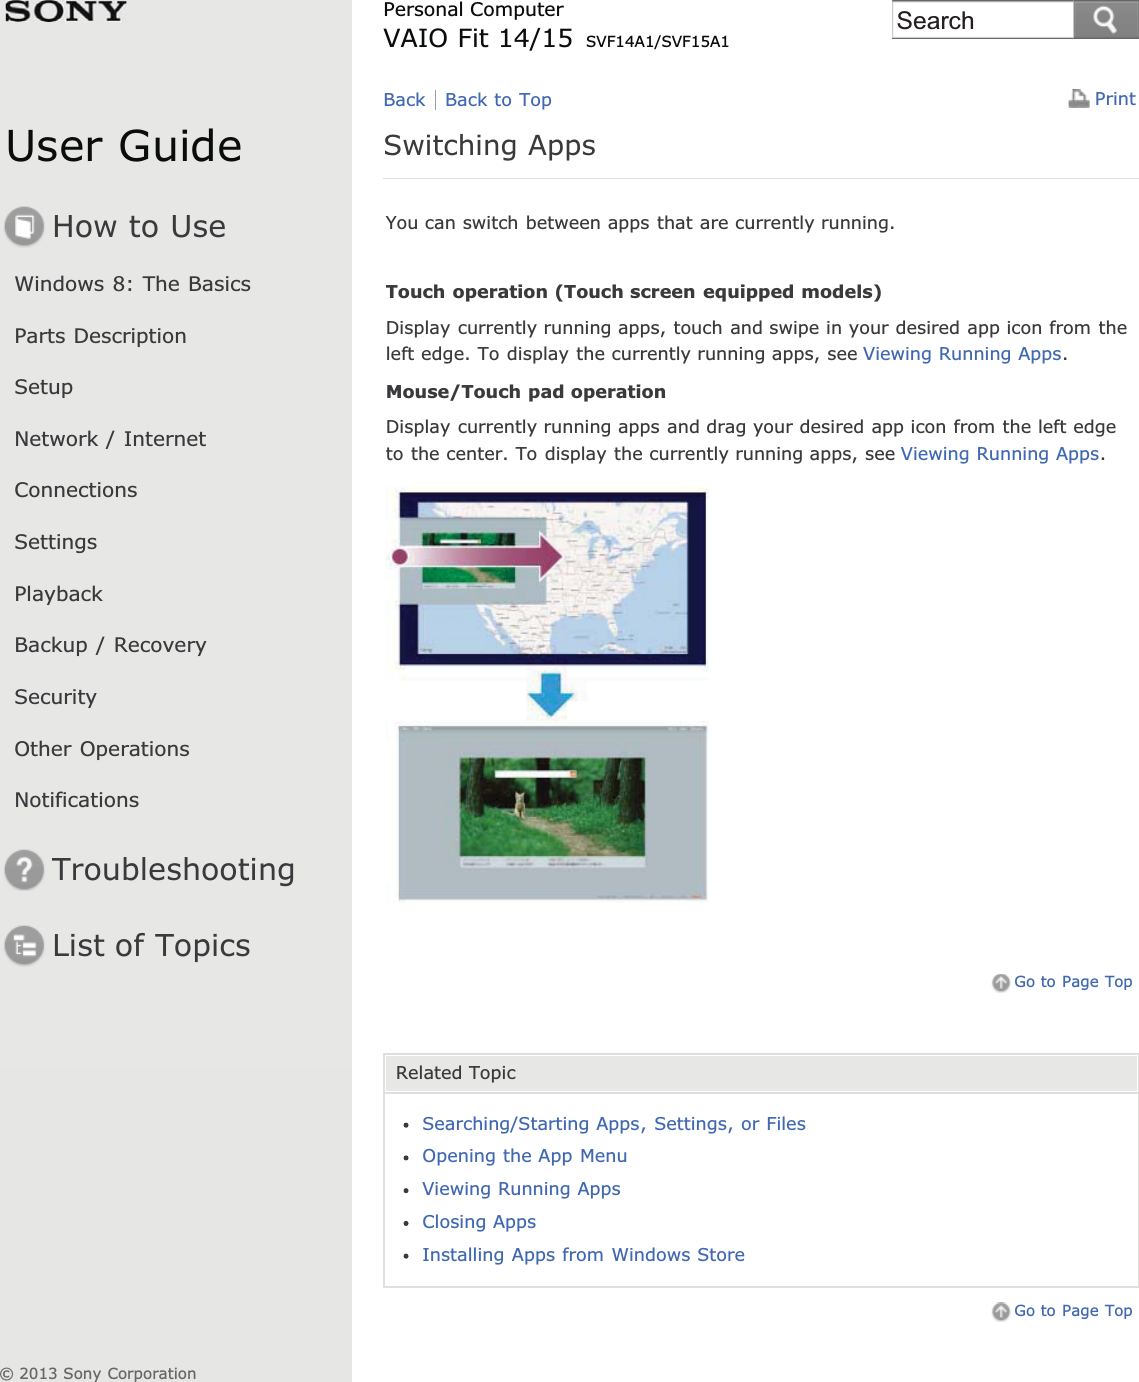 User GuideHow to UseWindows 8: The BasicsParts DescriptionSetupNetwork / InternetConnectionsSettingsPlaybackBackup / RecoverySecurityOther OperationsNotificationsTroubleshootingList of TopicsPrintPersonal ComputerVAIO Fit 14/15 SVF14A1/SVF15A1Switching AppsYou can switch between apps that are currently running.Touch operation (Touch screen equipped models)Display currently running apps, touch and swipe in your desired app icon from theleft edge. To display the currently running apps, see Viewing Running Apps.Mouse/Touch pad operationDisplay currently running apps and drag your desired app icon from the left edgeto the center. To display the currently running apps, see Viewing Running Apps.Go to Page TopRelated TopicSearching/Starting Apps, Settings, or FilesOpening the App MenuViewing Running AppsClosing AppsInstalling Apps from Windows StoreGo to Page TopBack Back to Top© 2013 Sony CorporationSearch